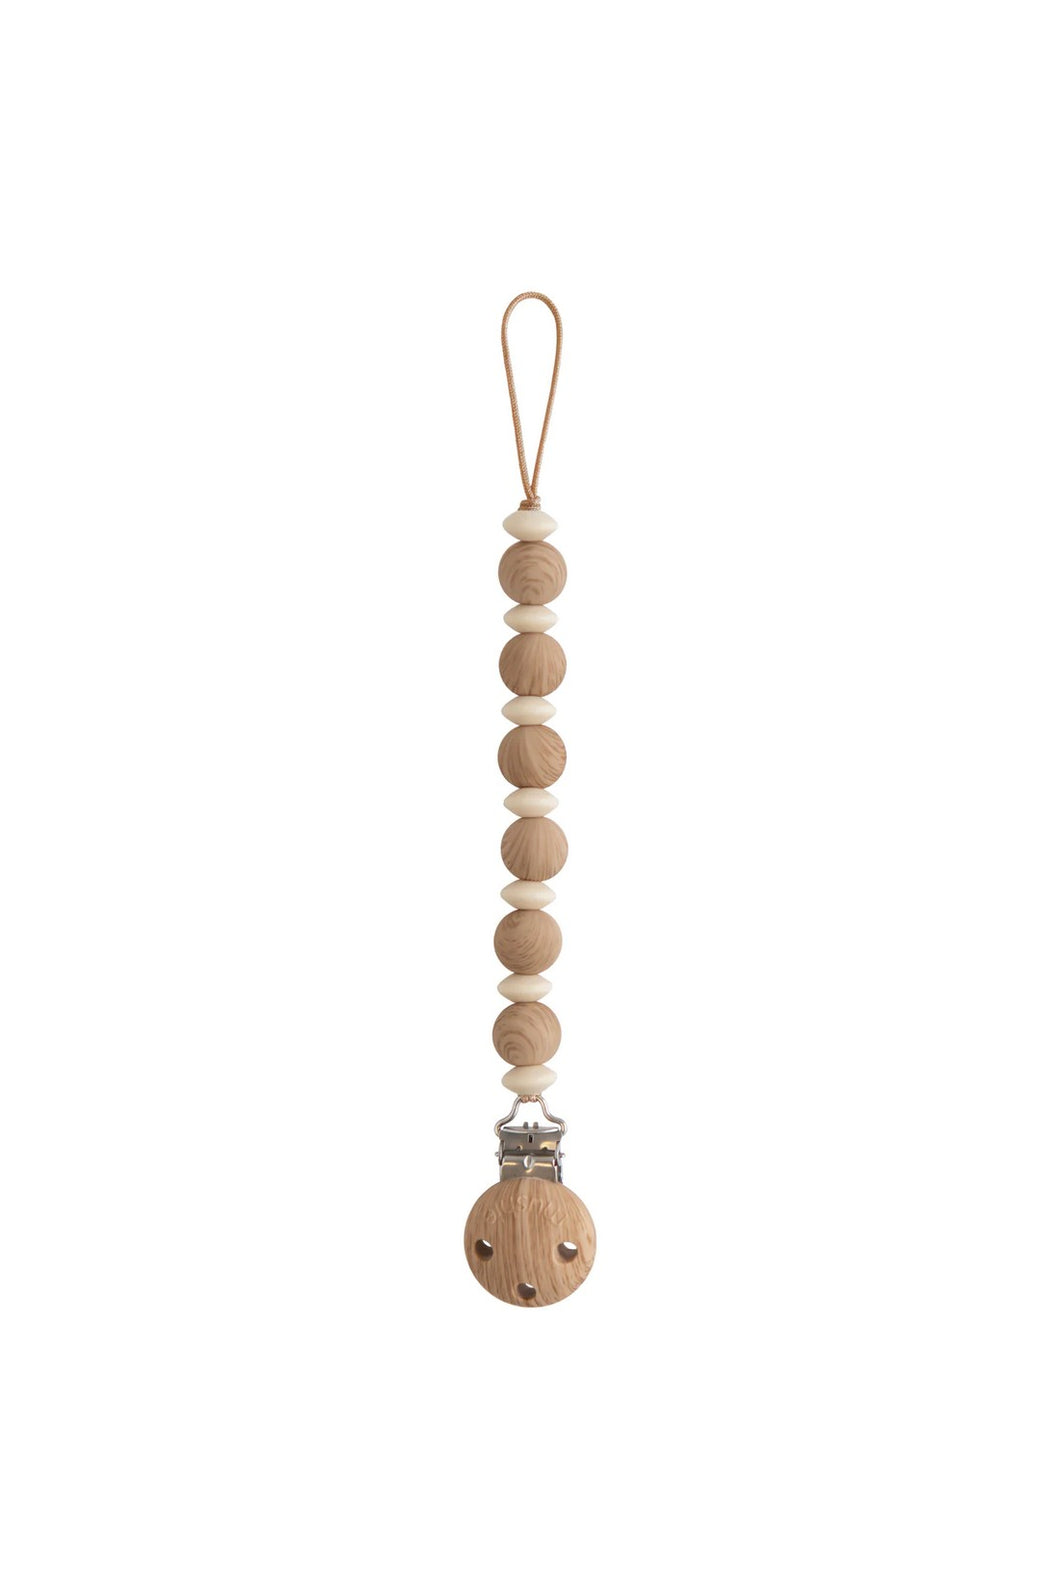 Mushie Silicone Pacifier Clip - Luna Faux Wood 1